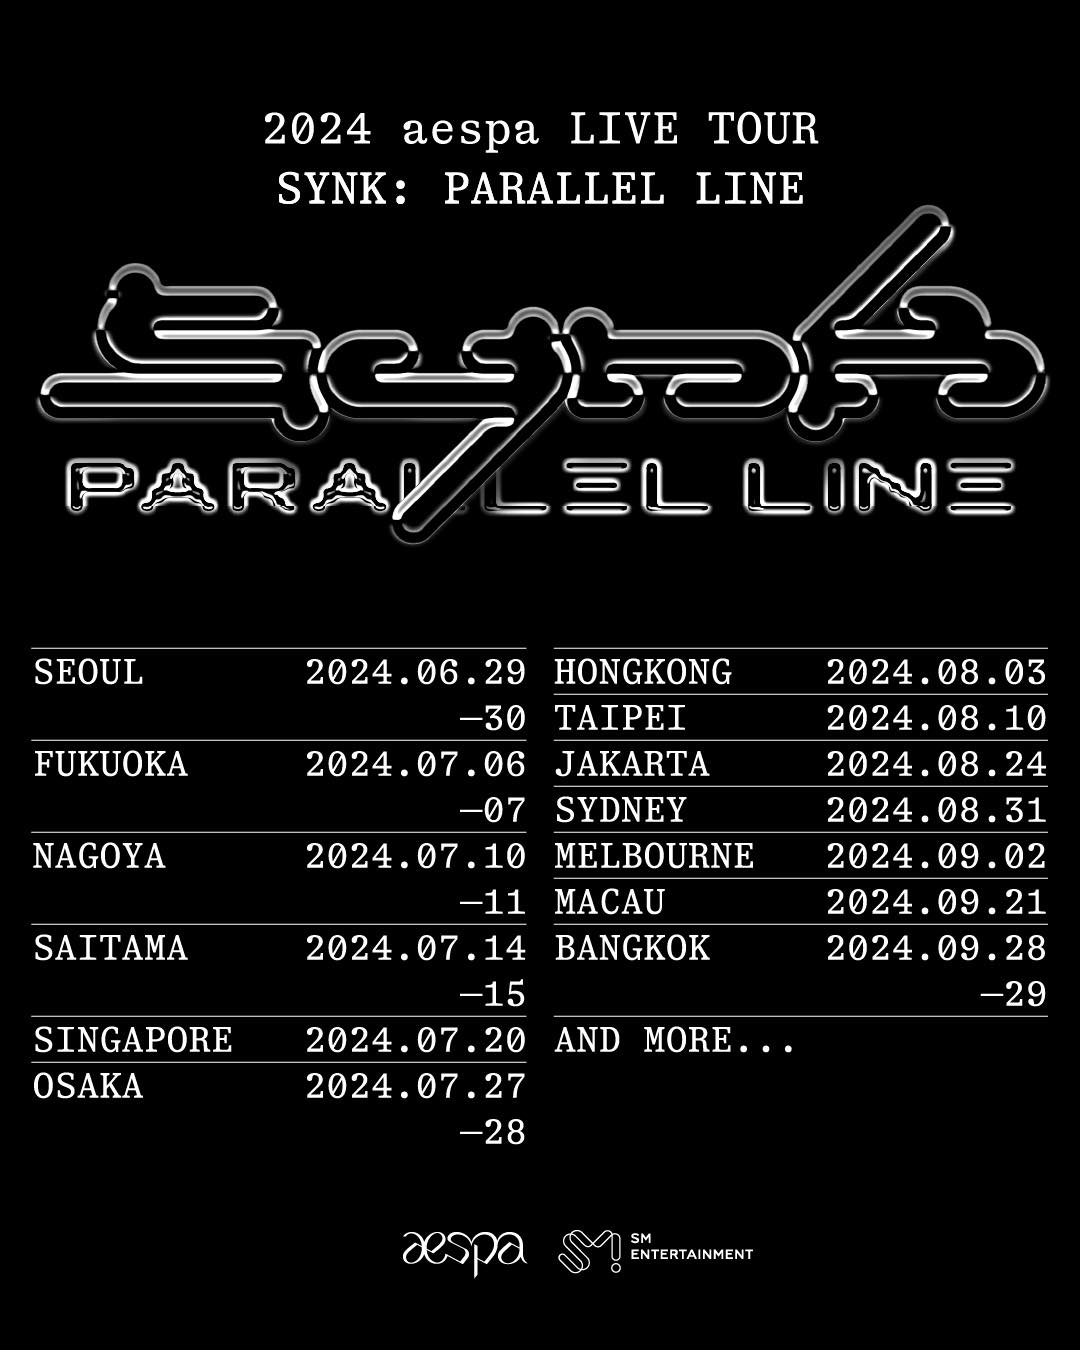 2024 aespa LIVE TOUR SYNK Parallel Line Seoul